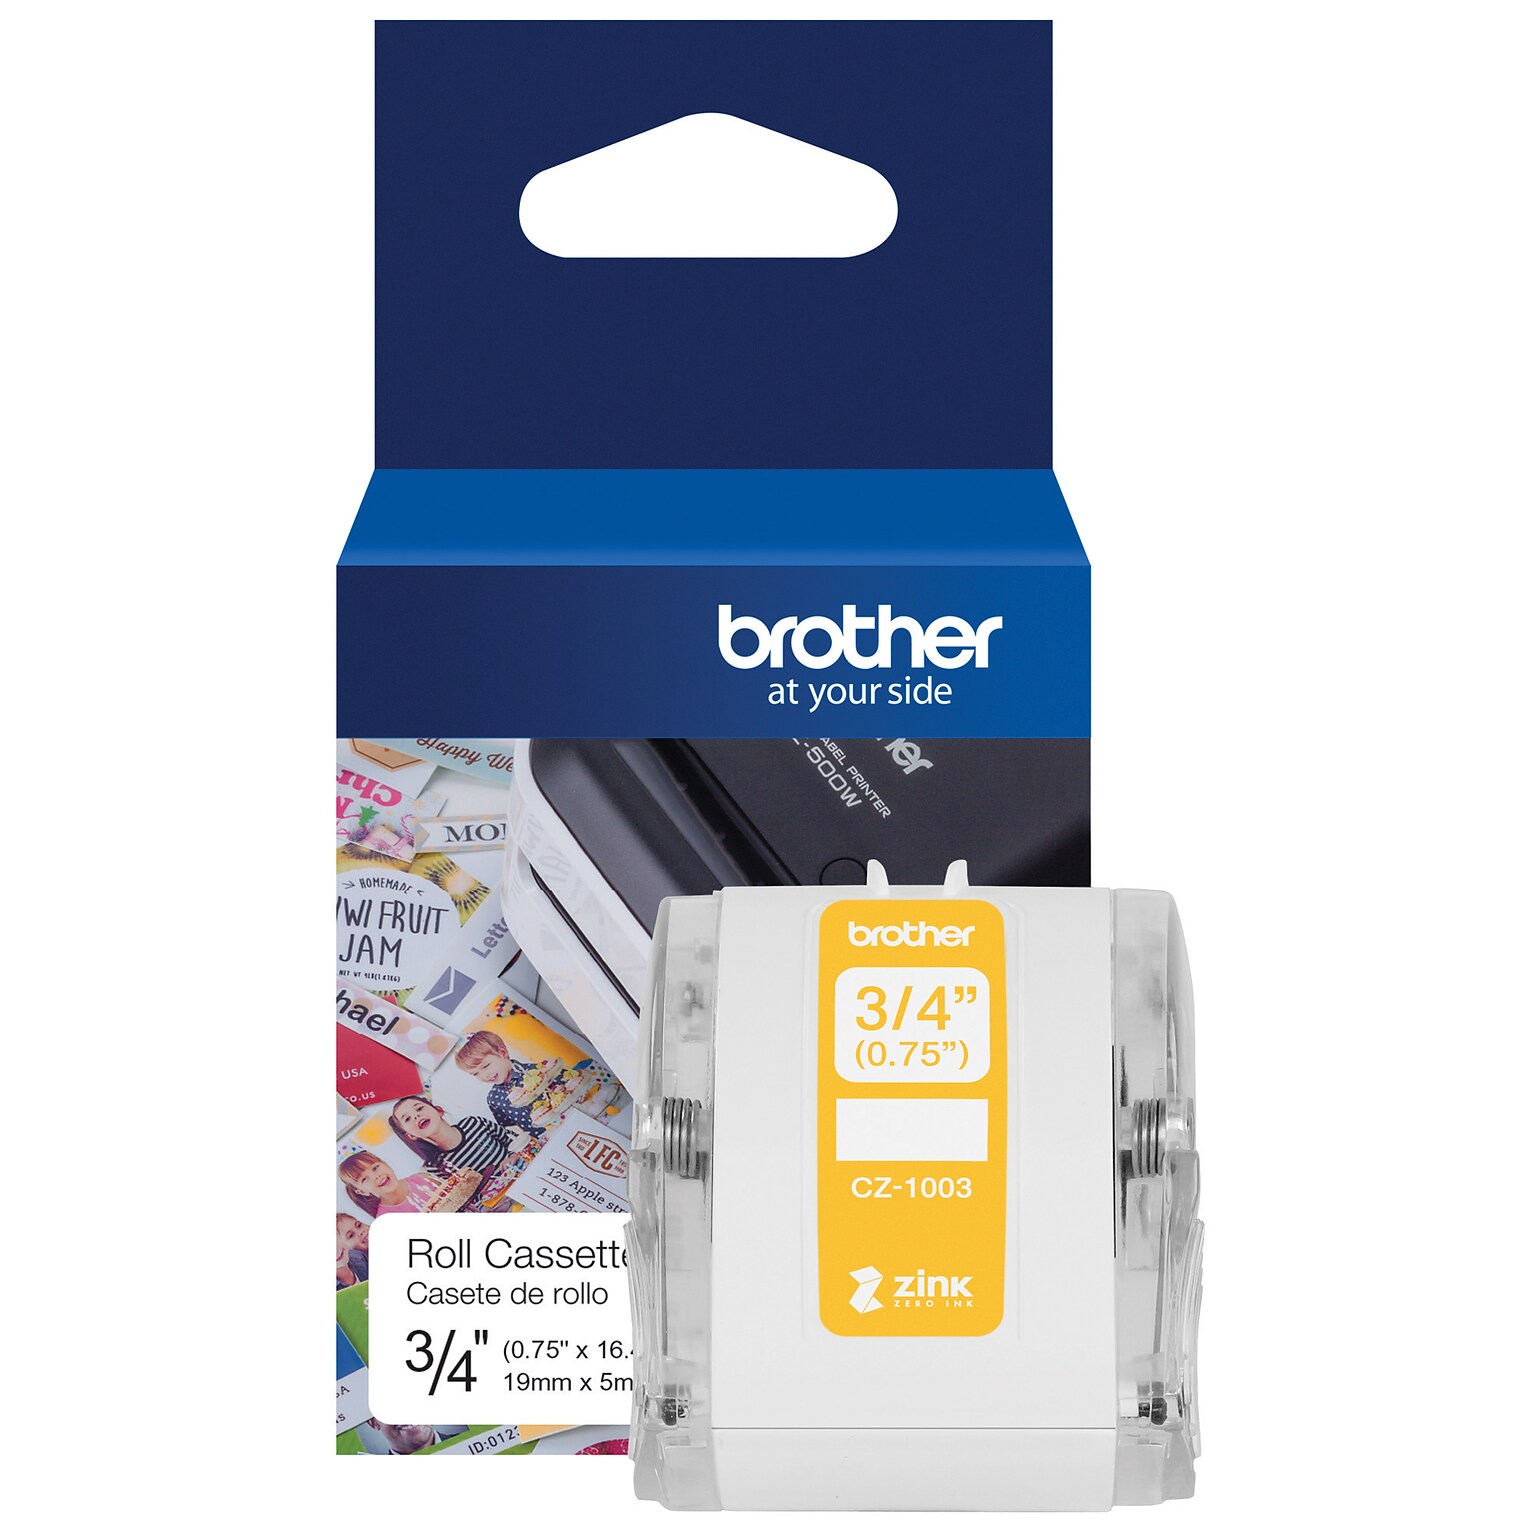 Brother CZ-1003 Continuous Paper Label Roll with ZINK® Zero Ink technology, 3/4 x 16-4/10, Multicolored (CZ-1003)